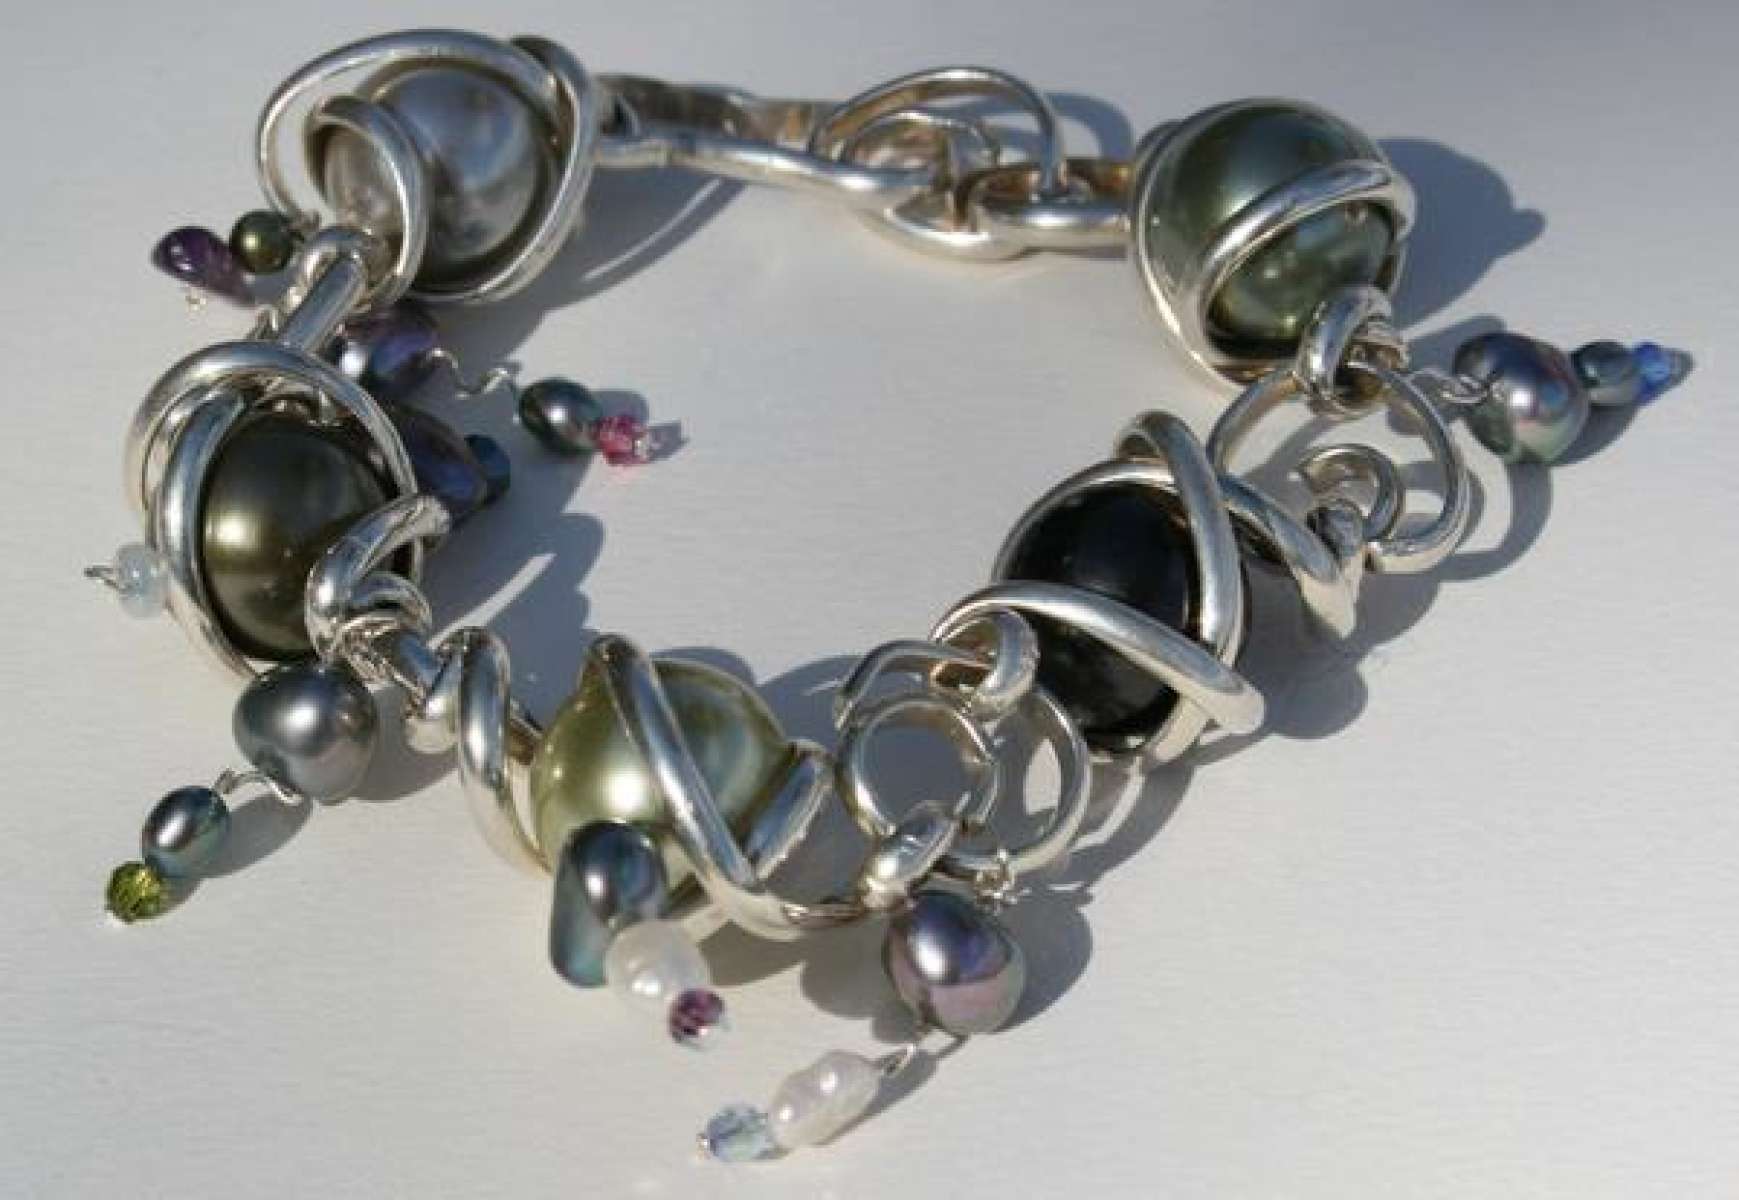 Shades of Grey Twists and Turns bracelet